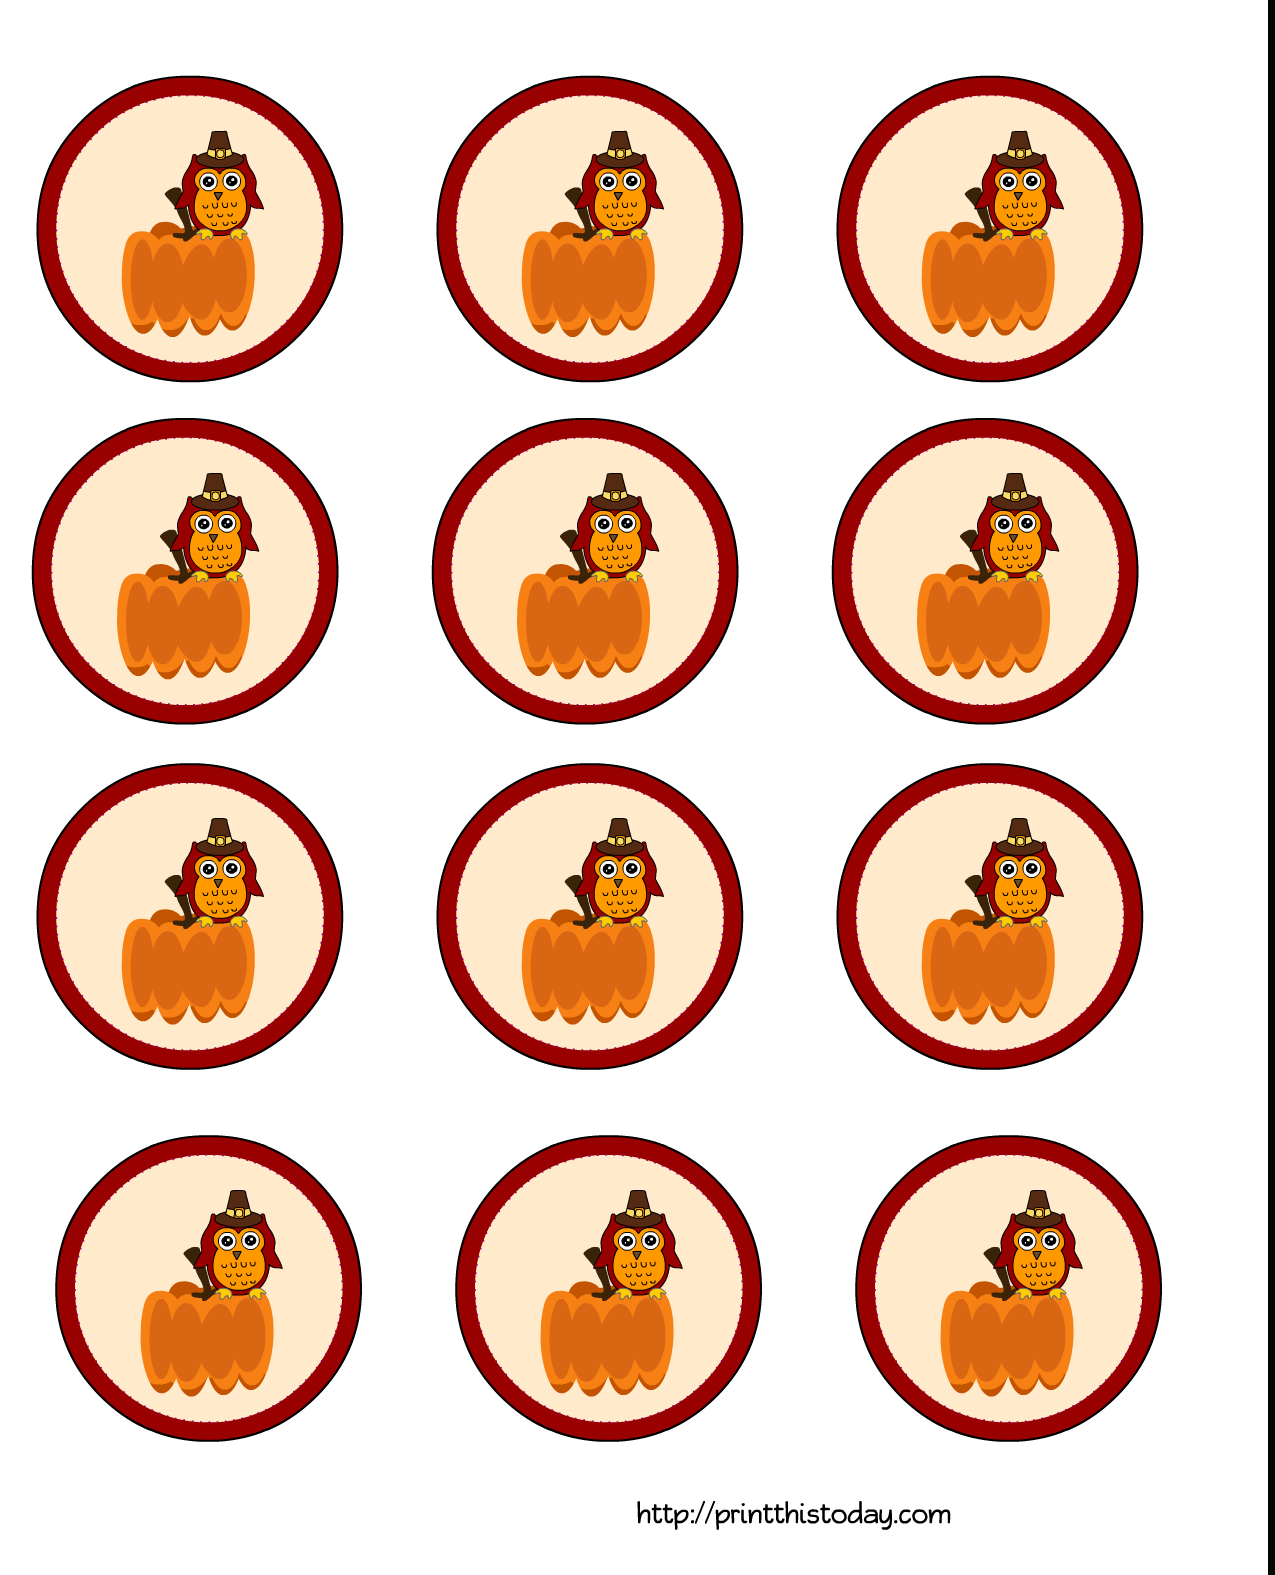 Pincrafty Annabelle On Thanksgiving Printables 2 | Cupcake - Thanksgiving Cupcake Toppers Printable Free